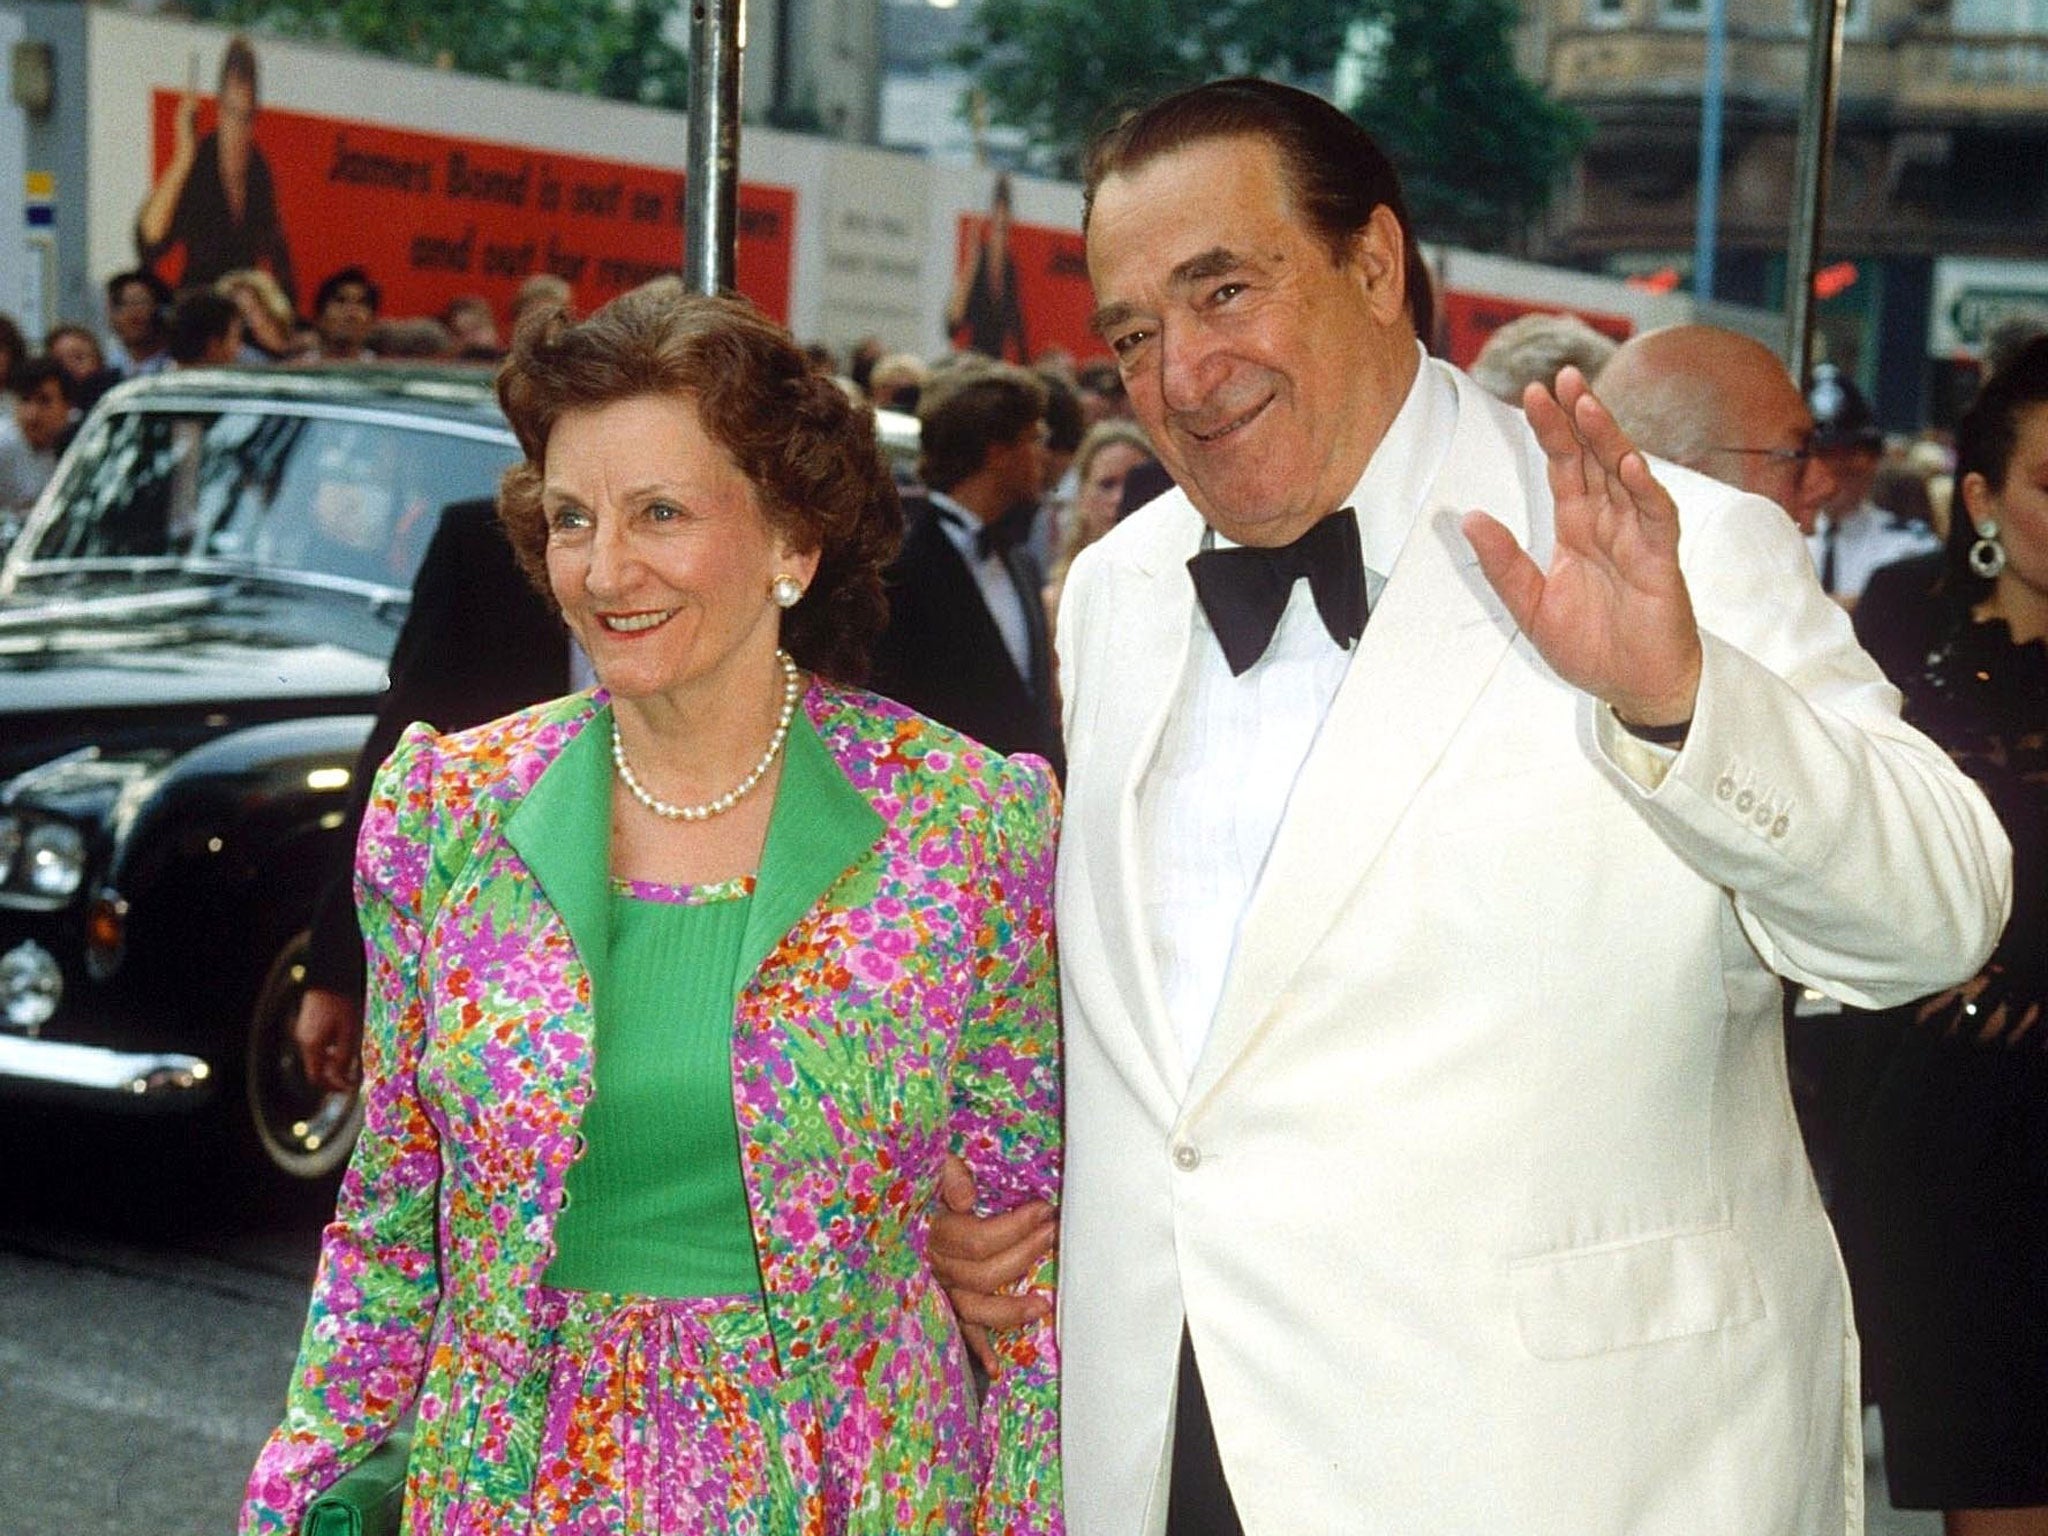 Elizabeth and Robert Maxwell at a film premiere in 1989